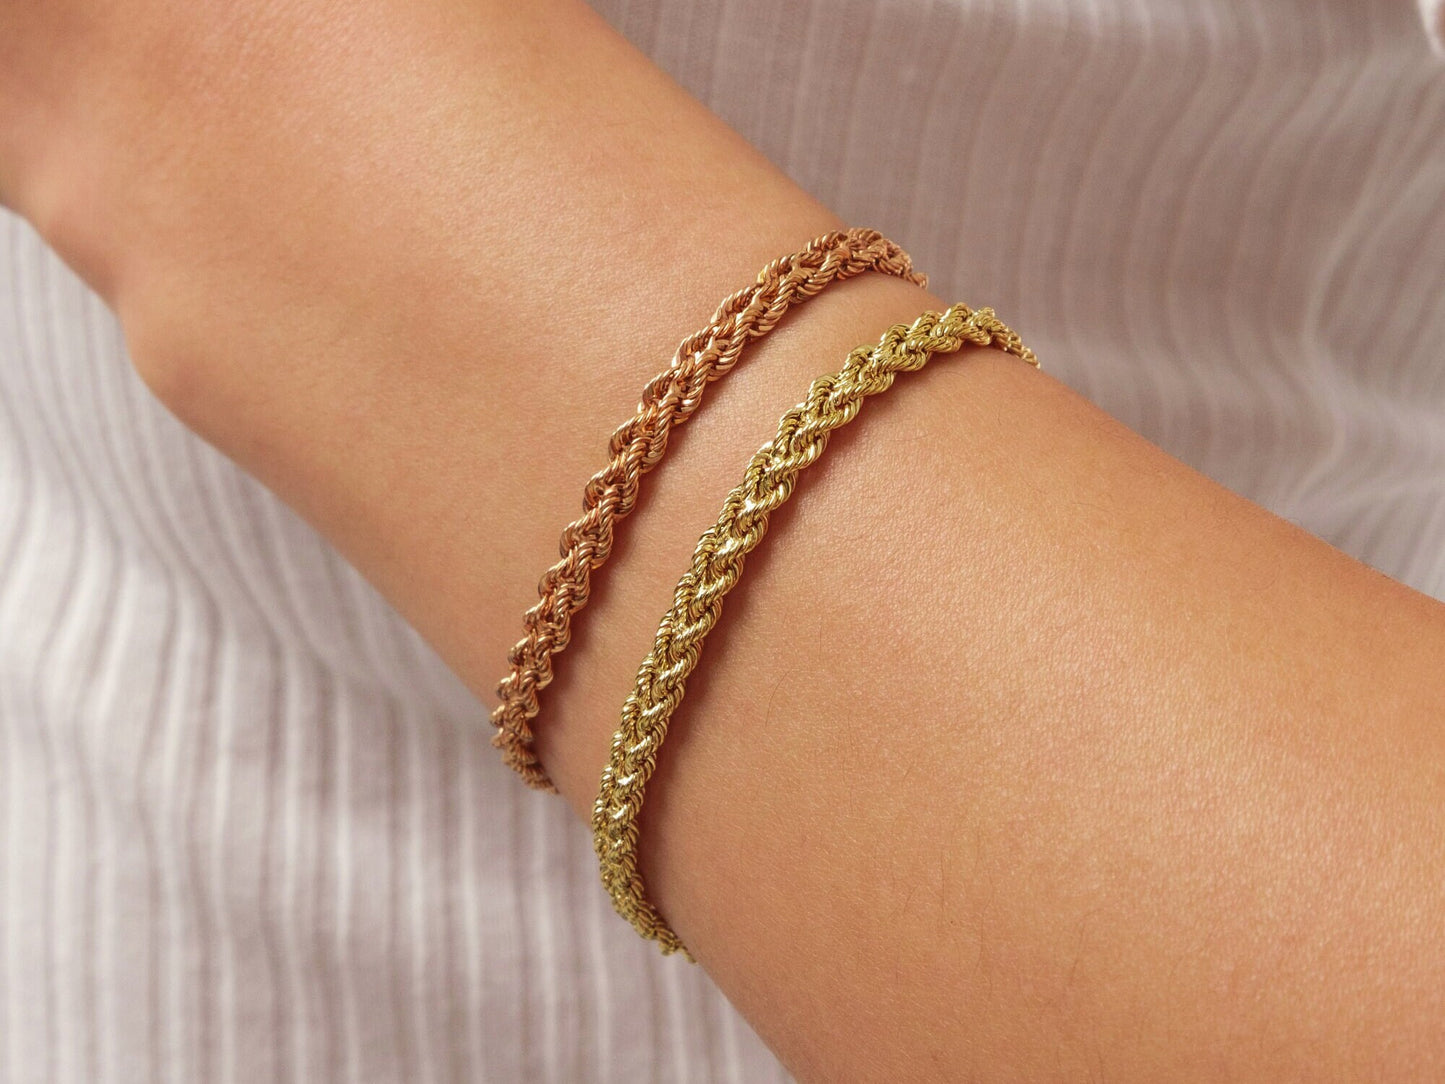 14K Gold Rope Chain Bracelet, Twisted Chain Bracelet, 4.5 mm Chain Bracelet, Sailor Clasp Rope Chain, Unisex Braided Stacking Delicate Chain